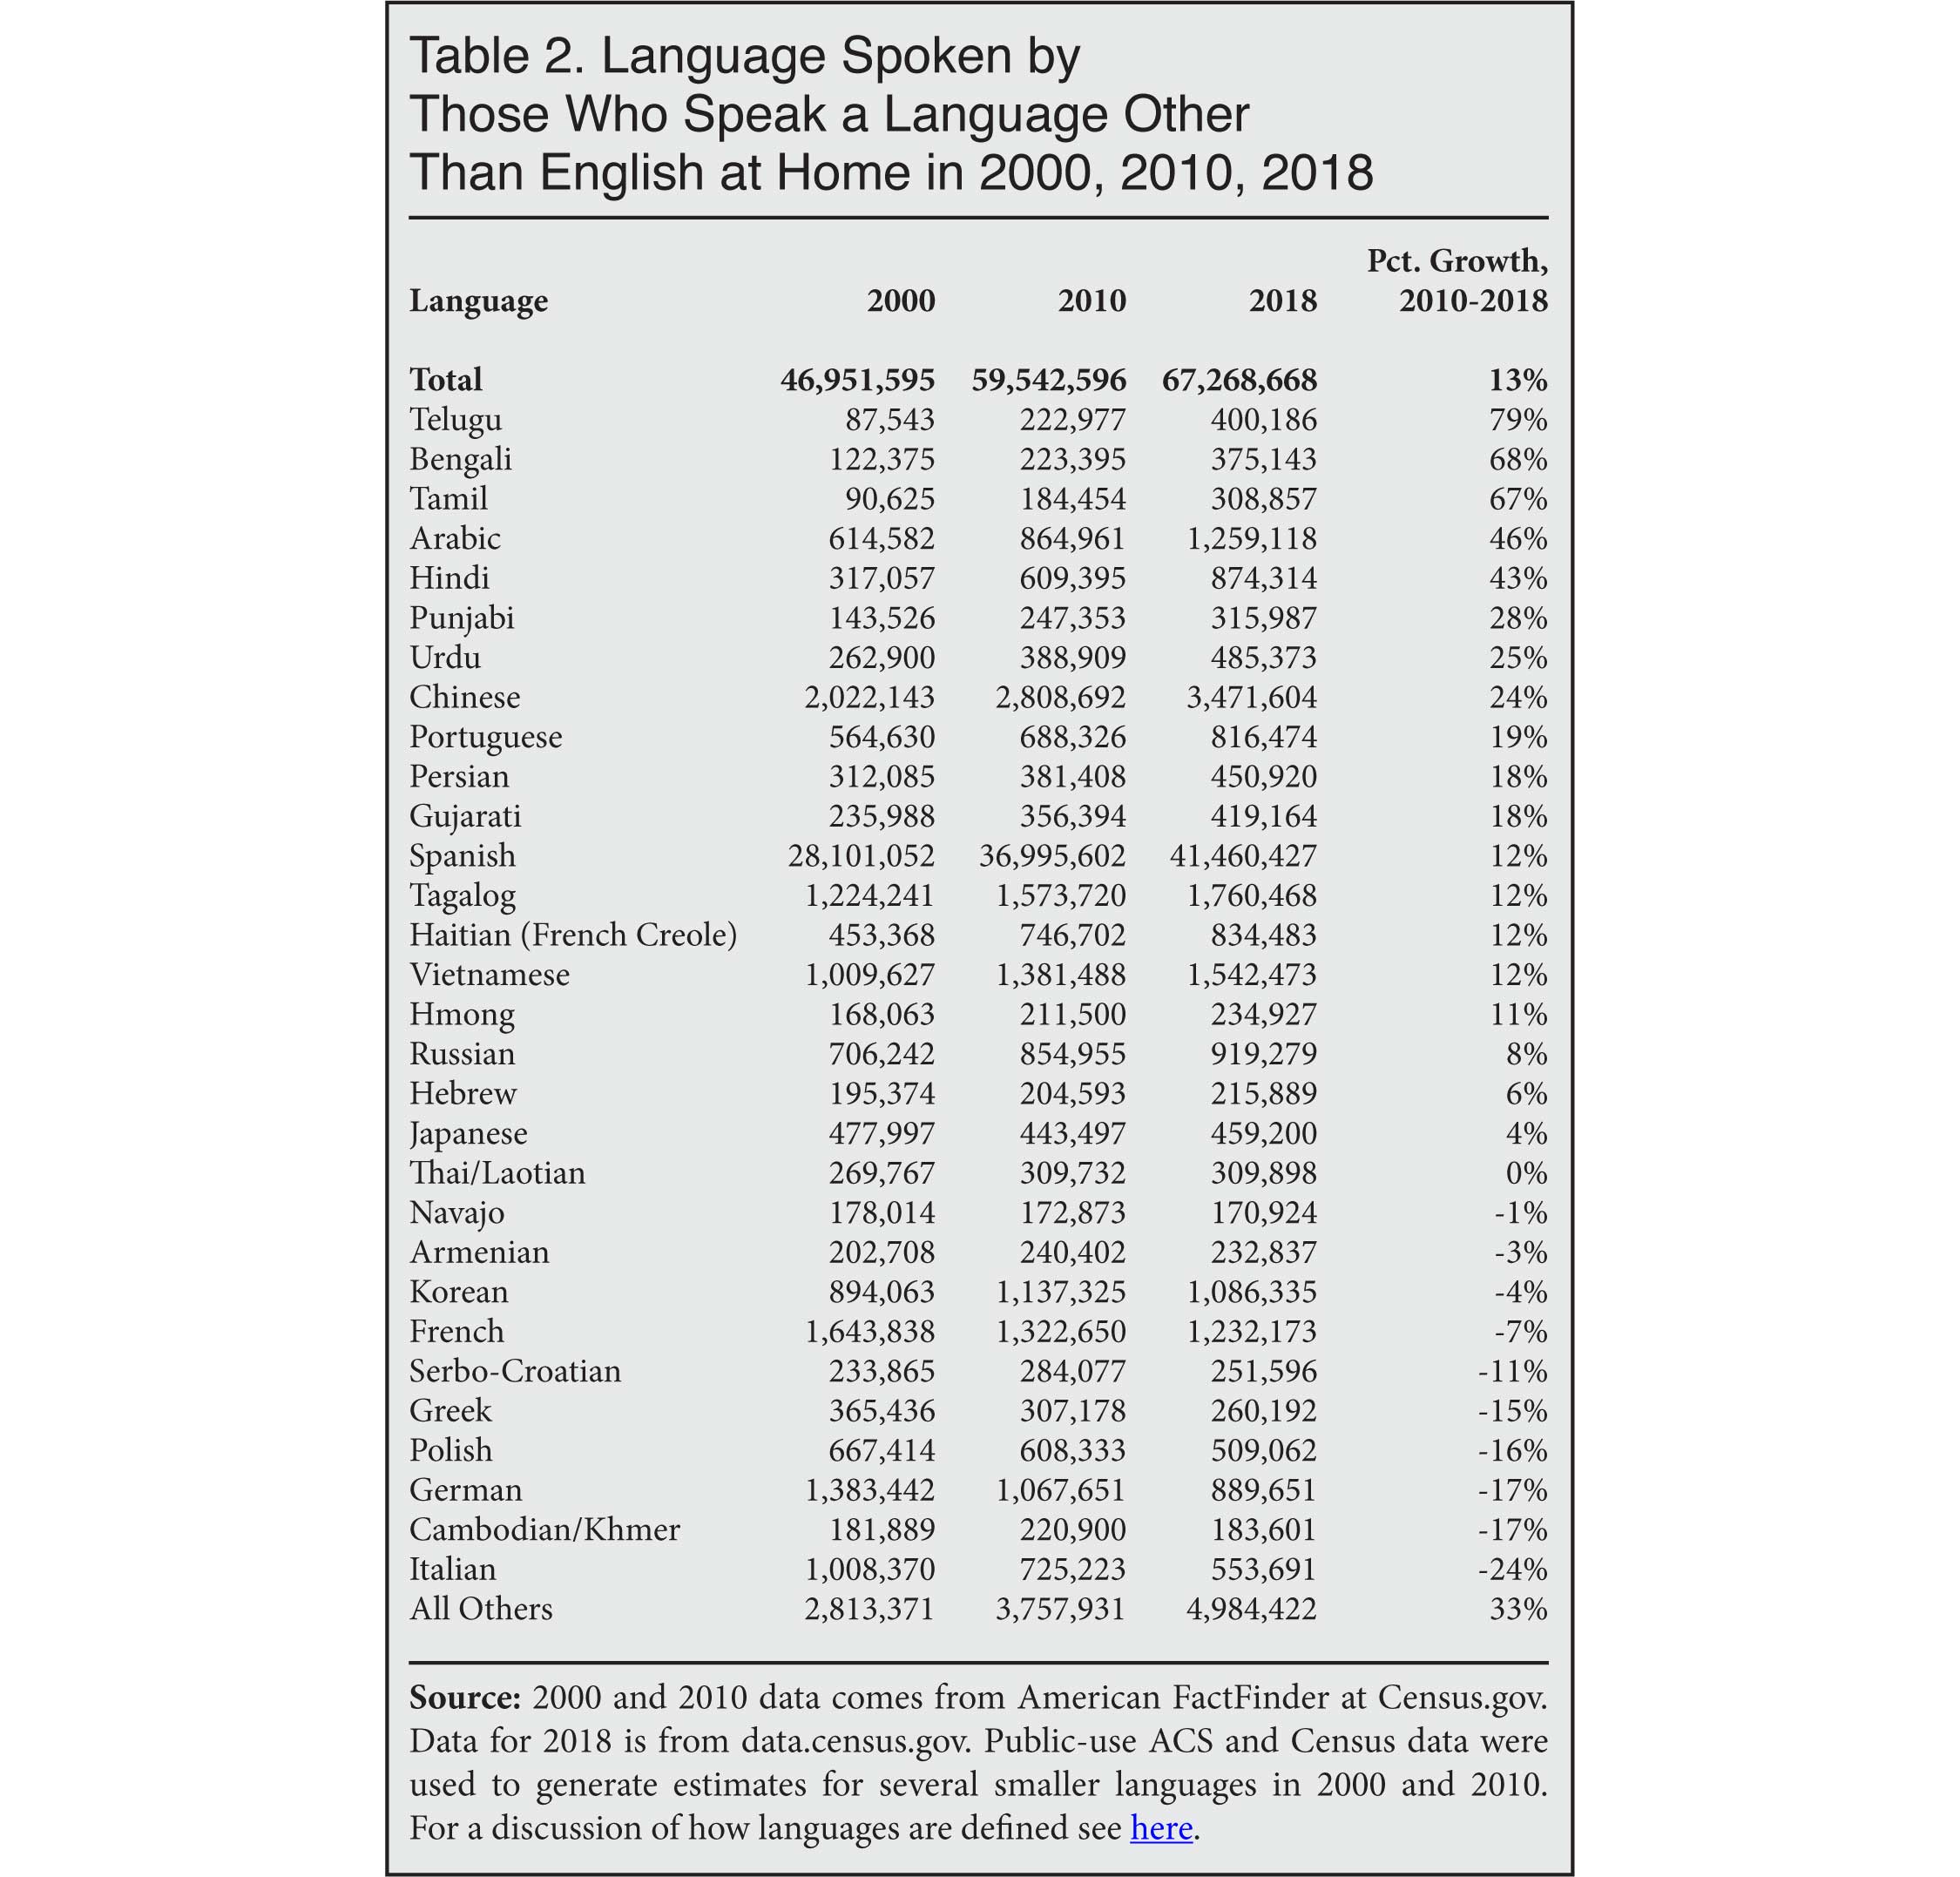 Table: Language Spoken by Those who Speak a Language Other than English at Home in 2000, 2010, 2018